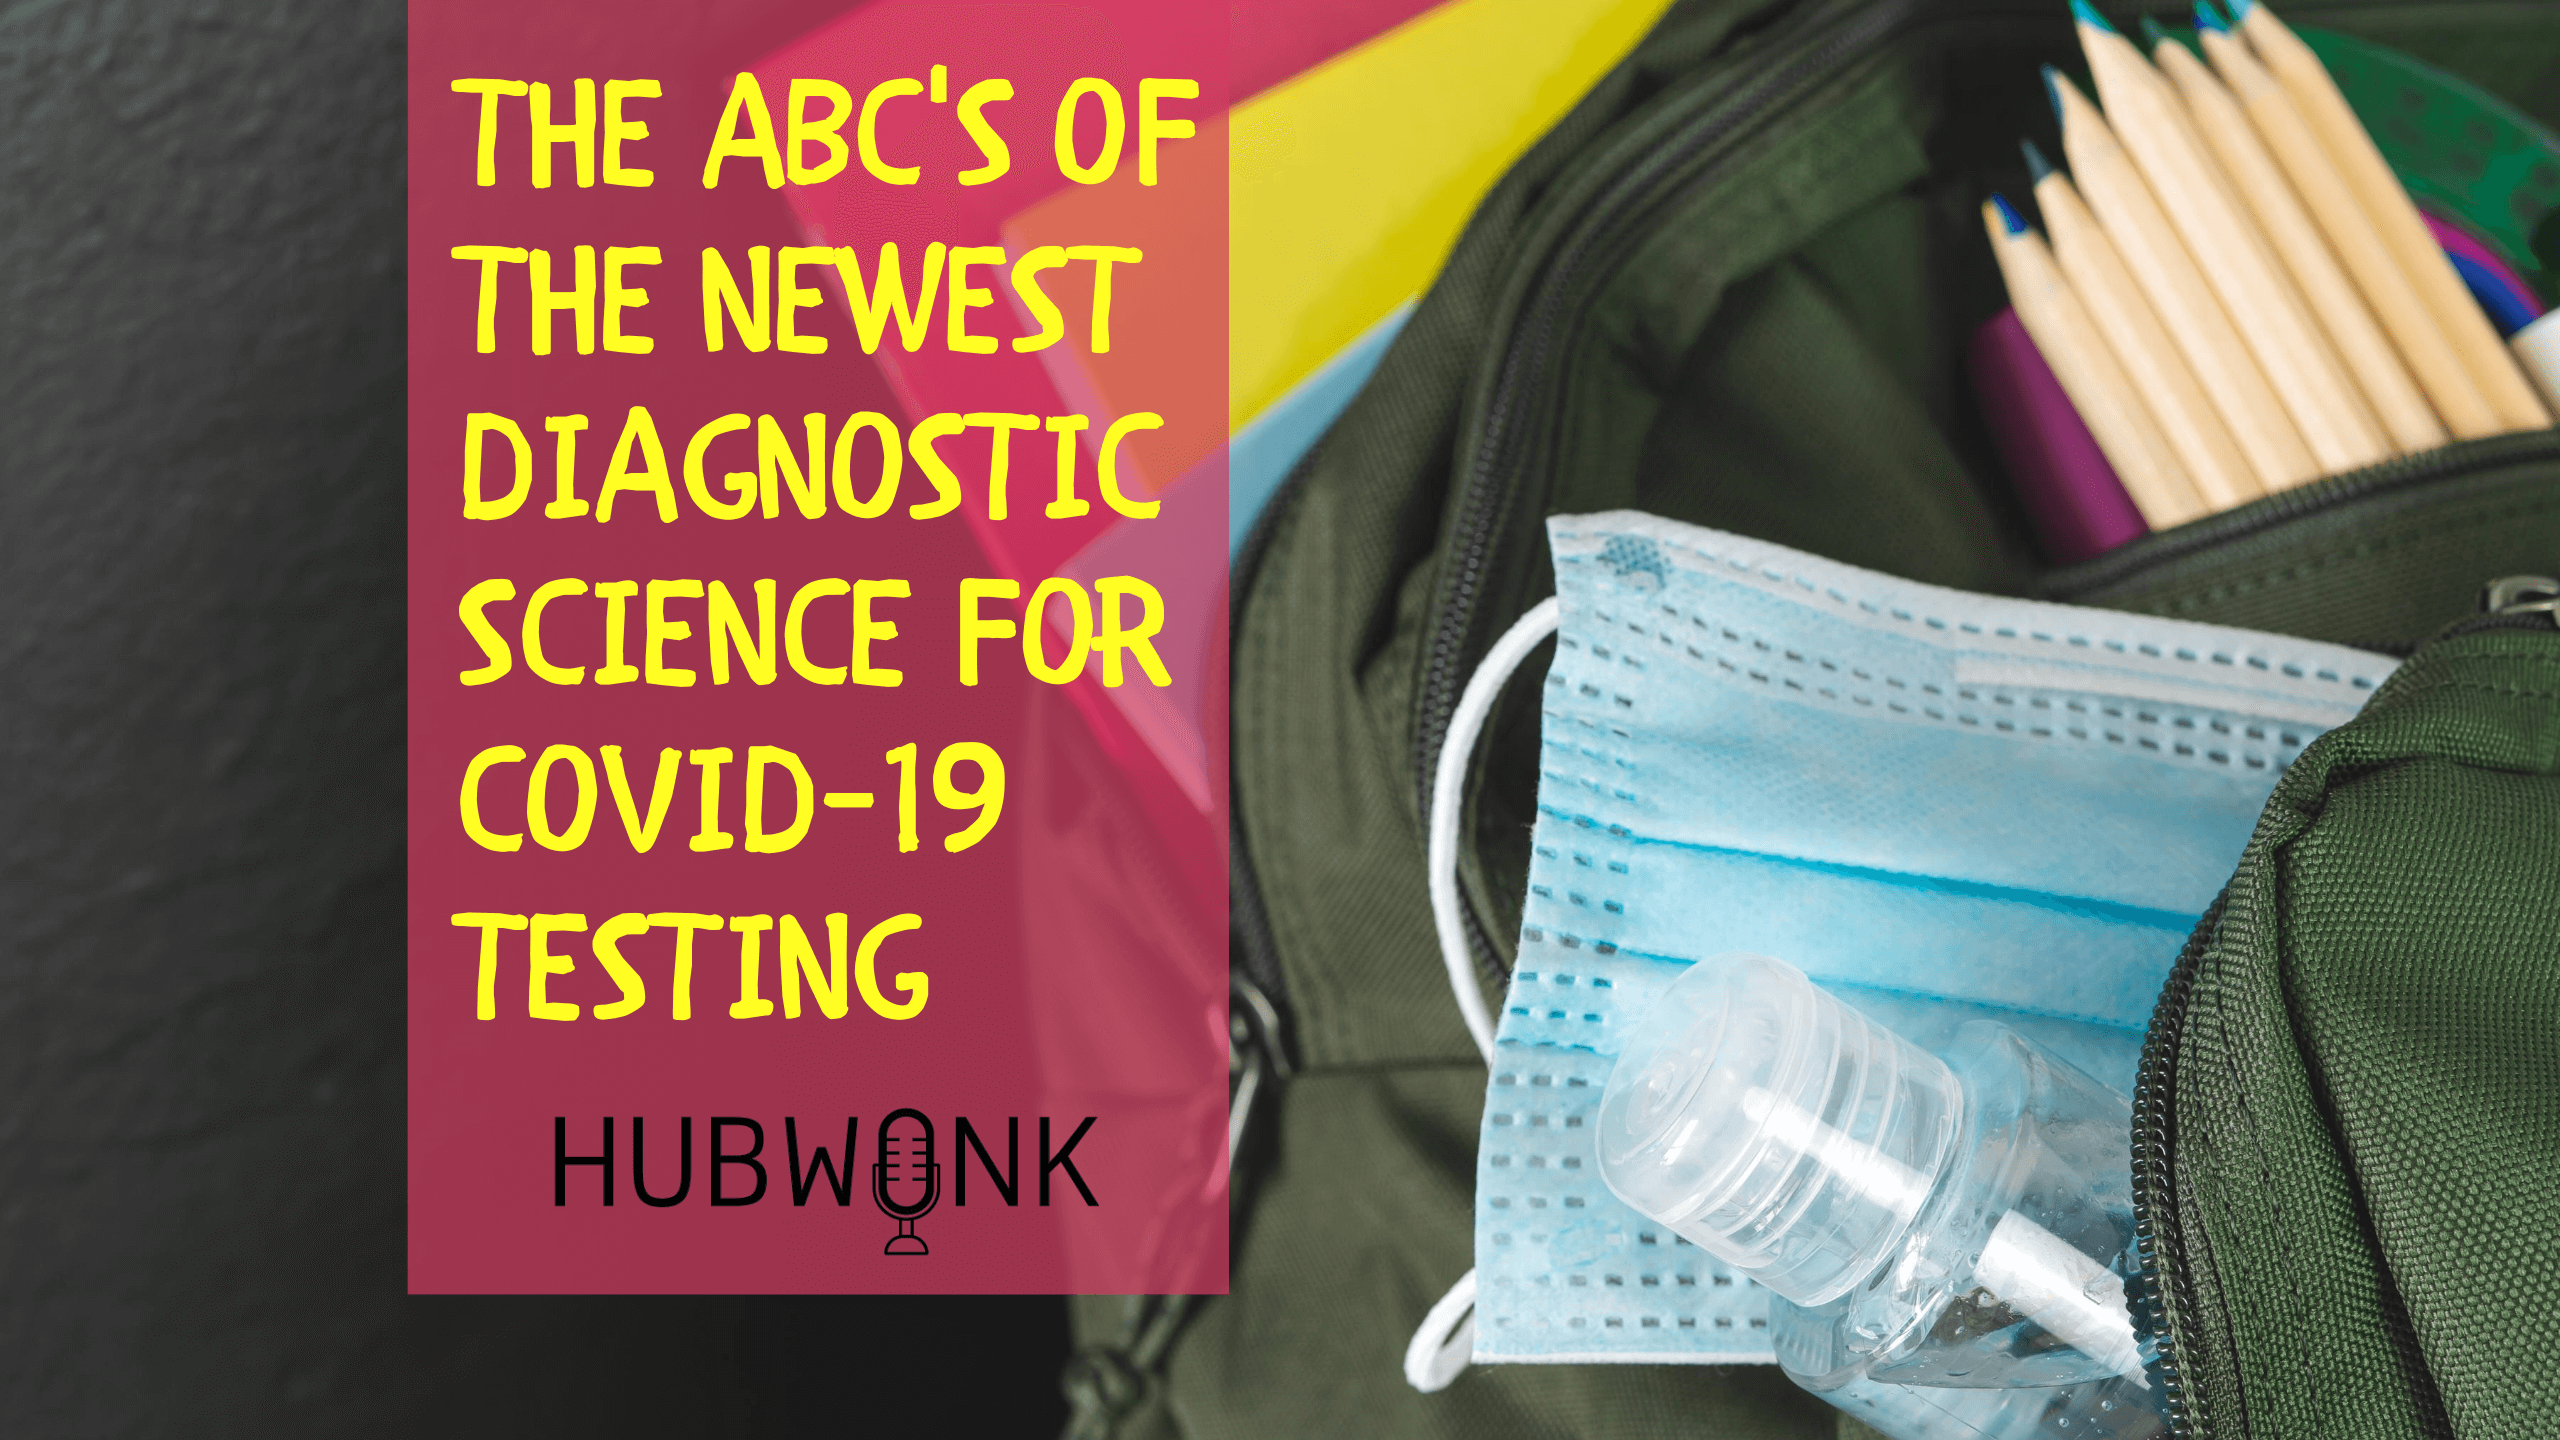 The ABCs of the Newest Diagnostic Science for COVID-19 Testing